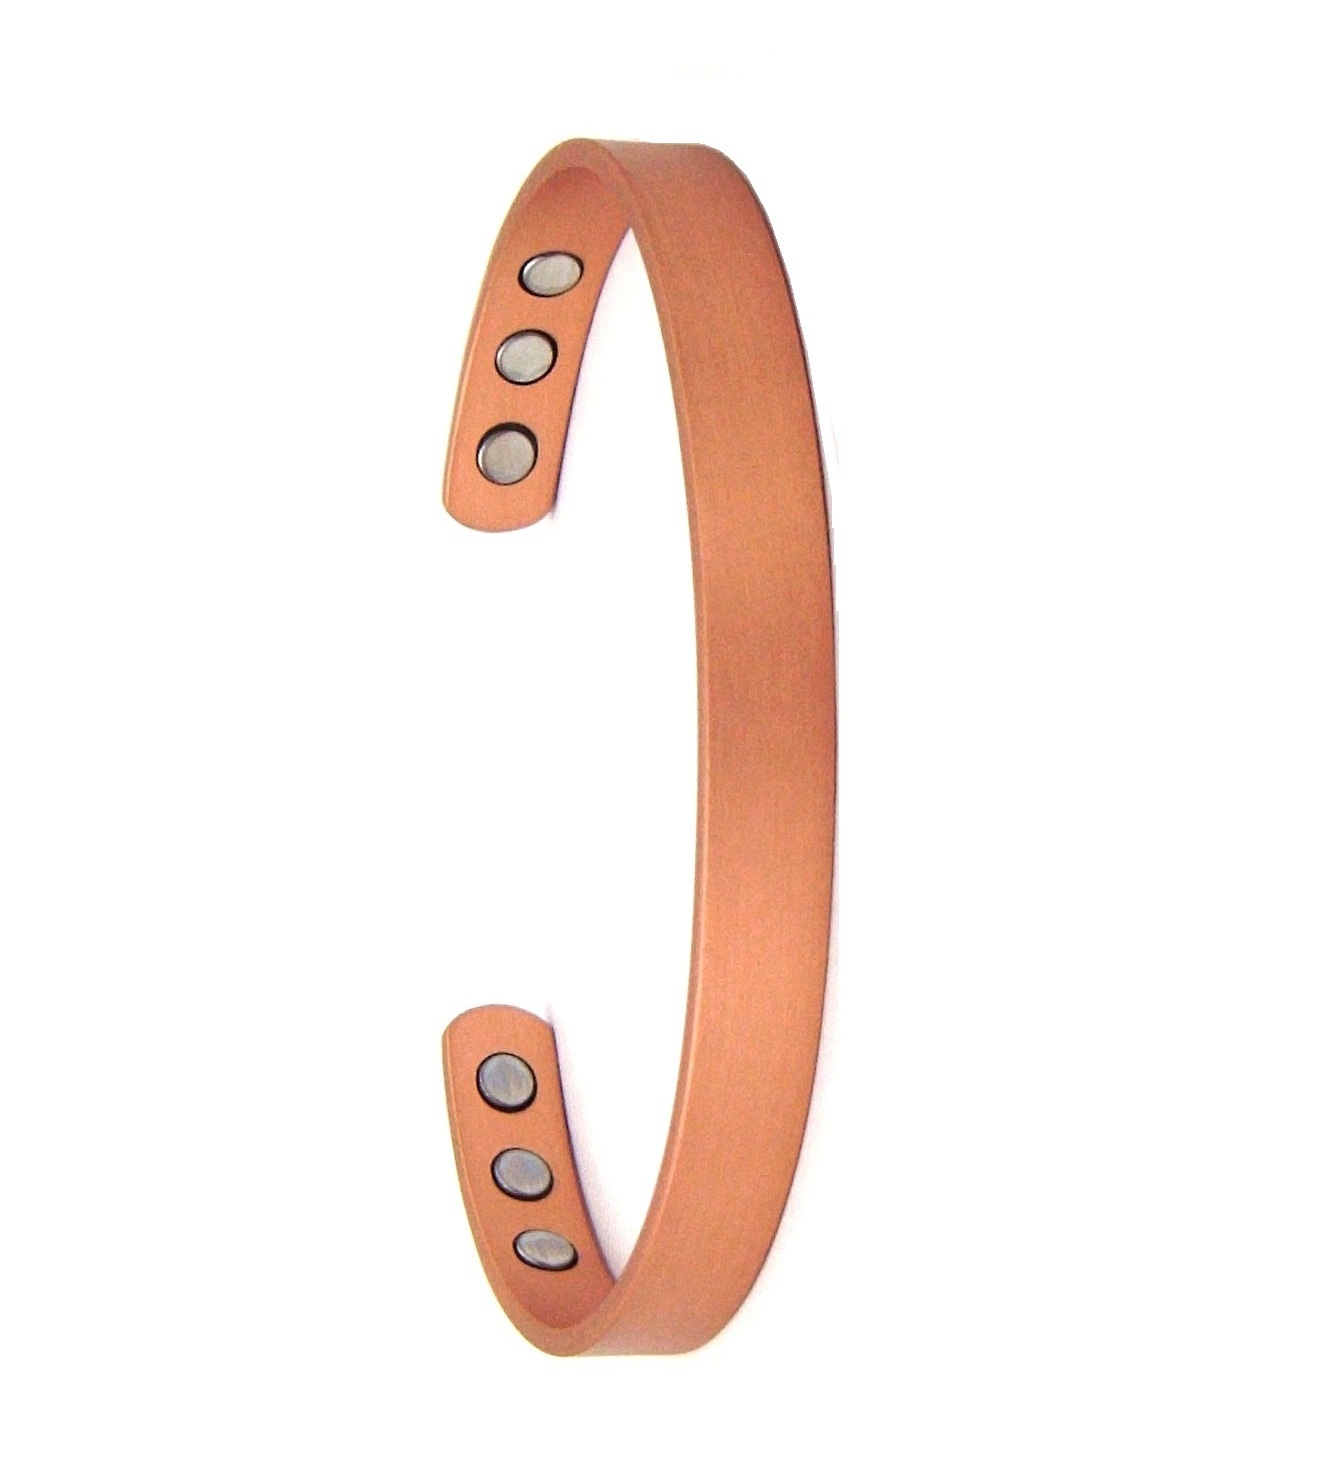 1/4" Mat Finish Plain Solid Copper Cuff Magnetic Therapy Bangle Bracelet #MBG006C